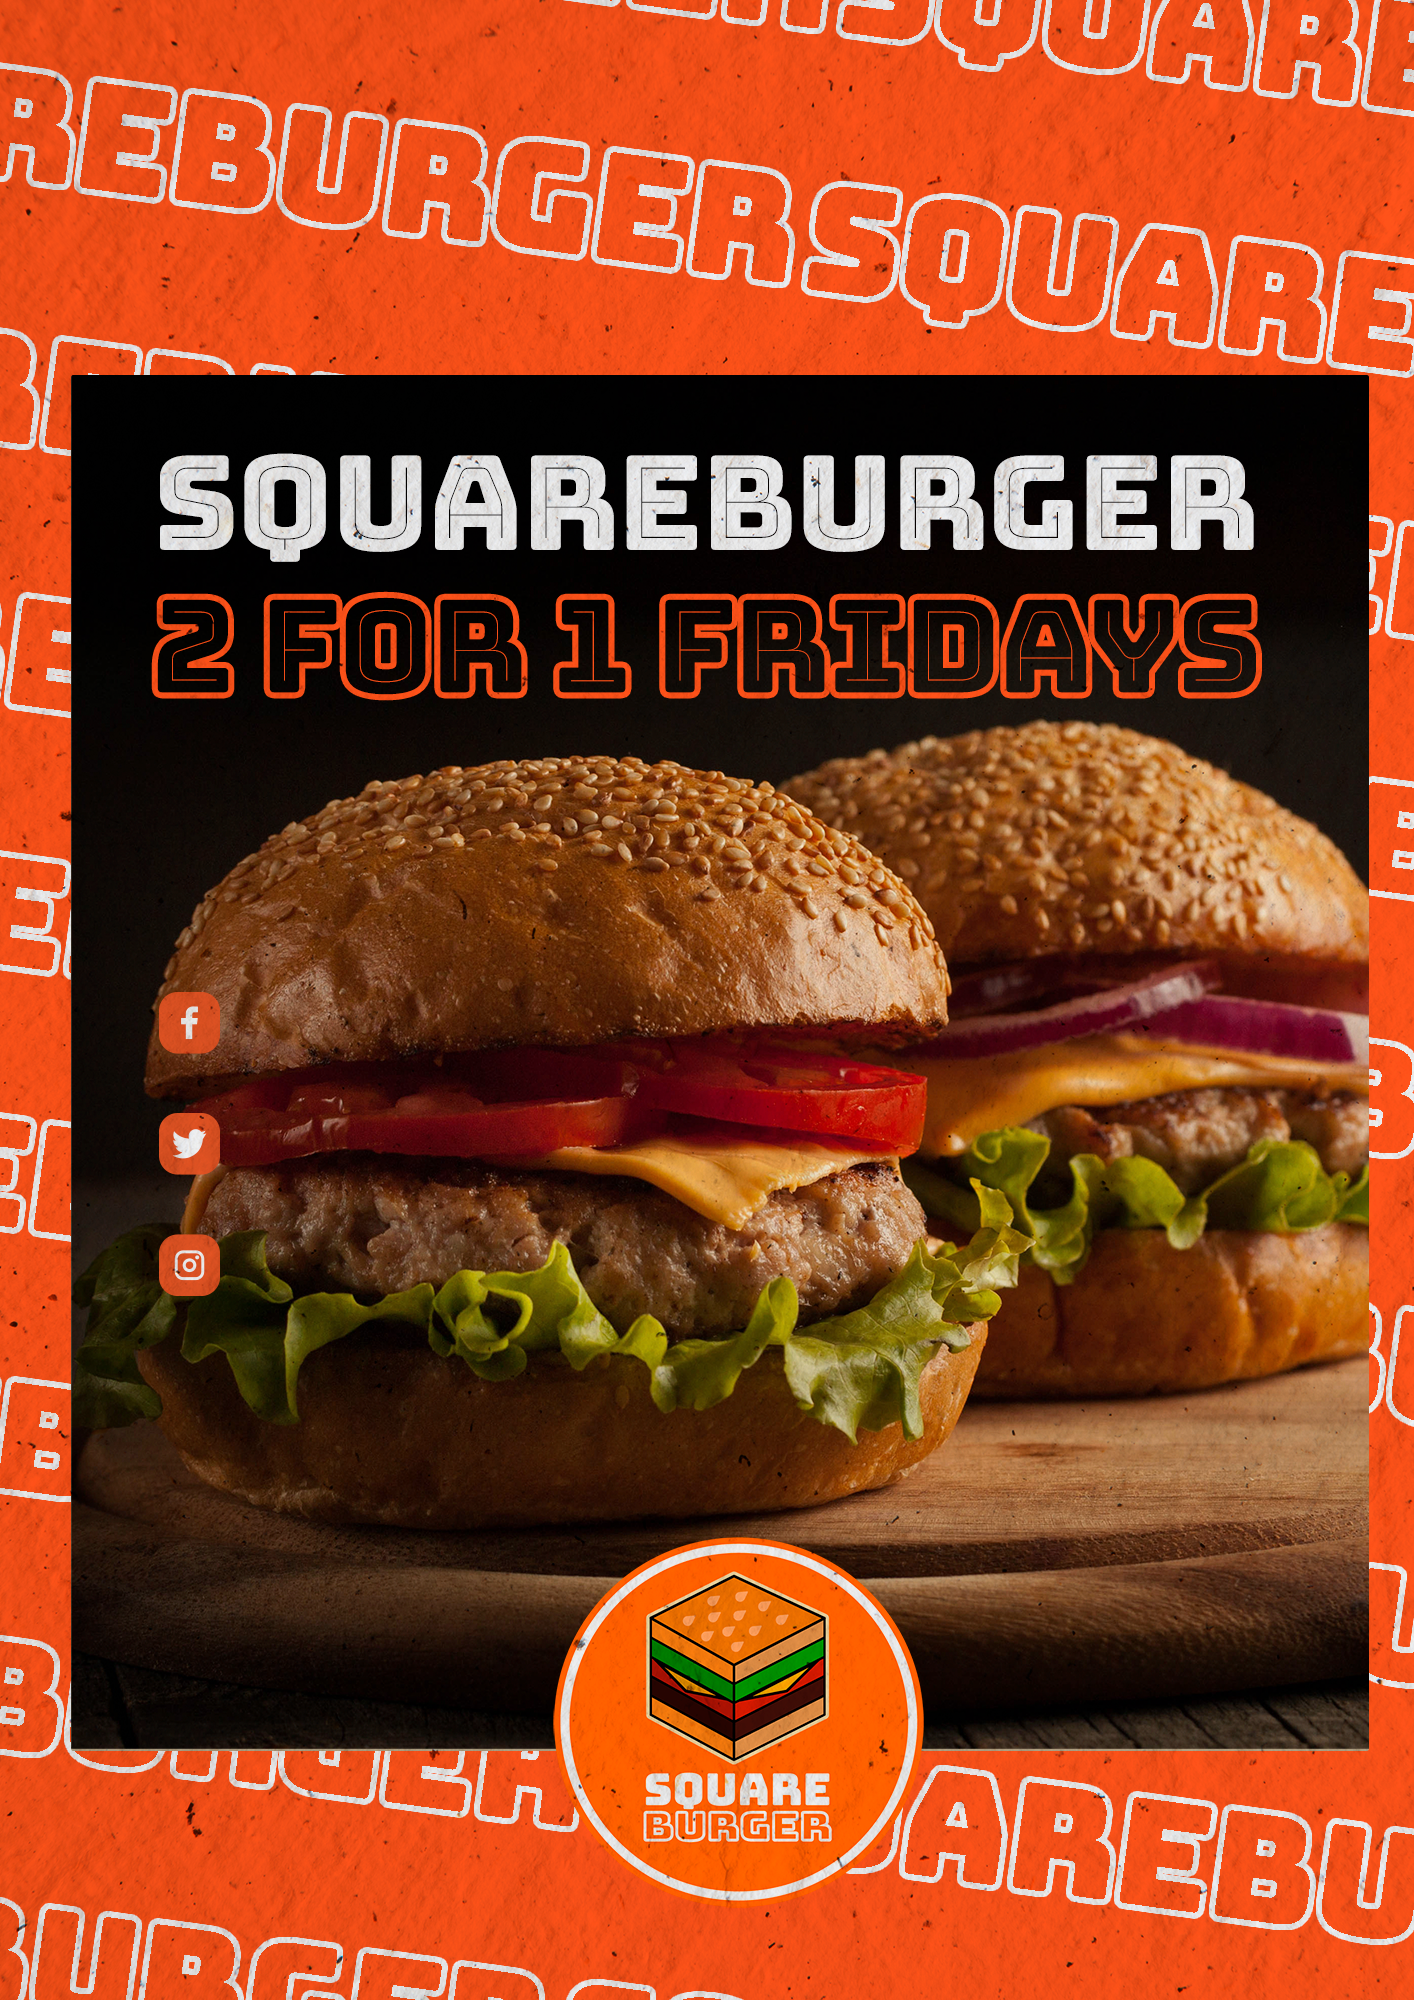 A flyer offering 2-4-1 burgers. Square Burger is prominently displayed down the flyer behind the image of a burger.